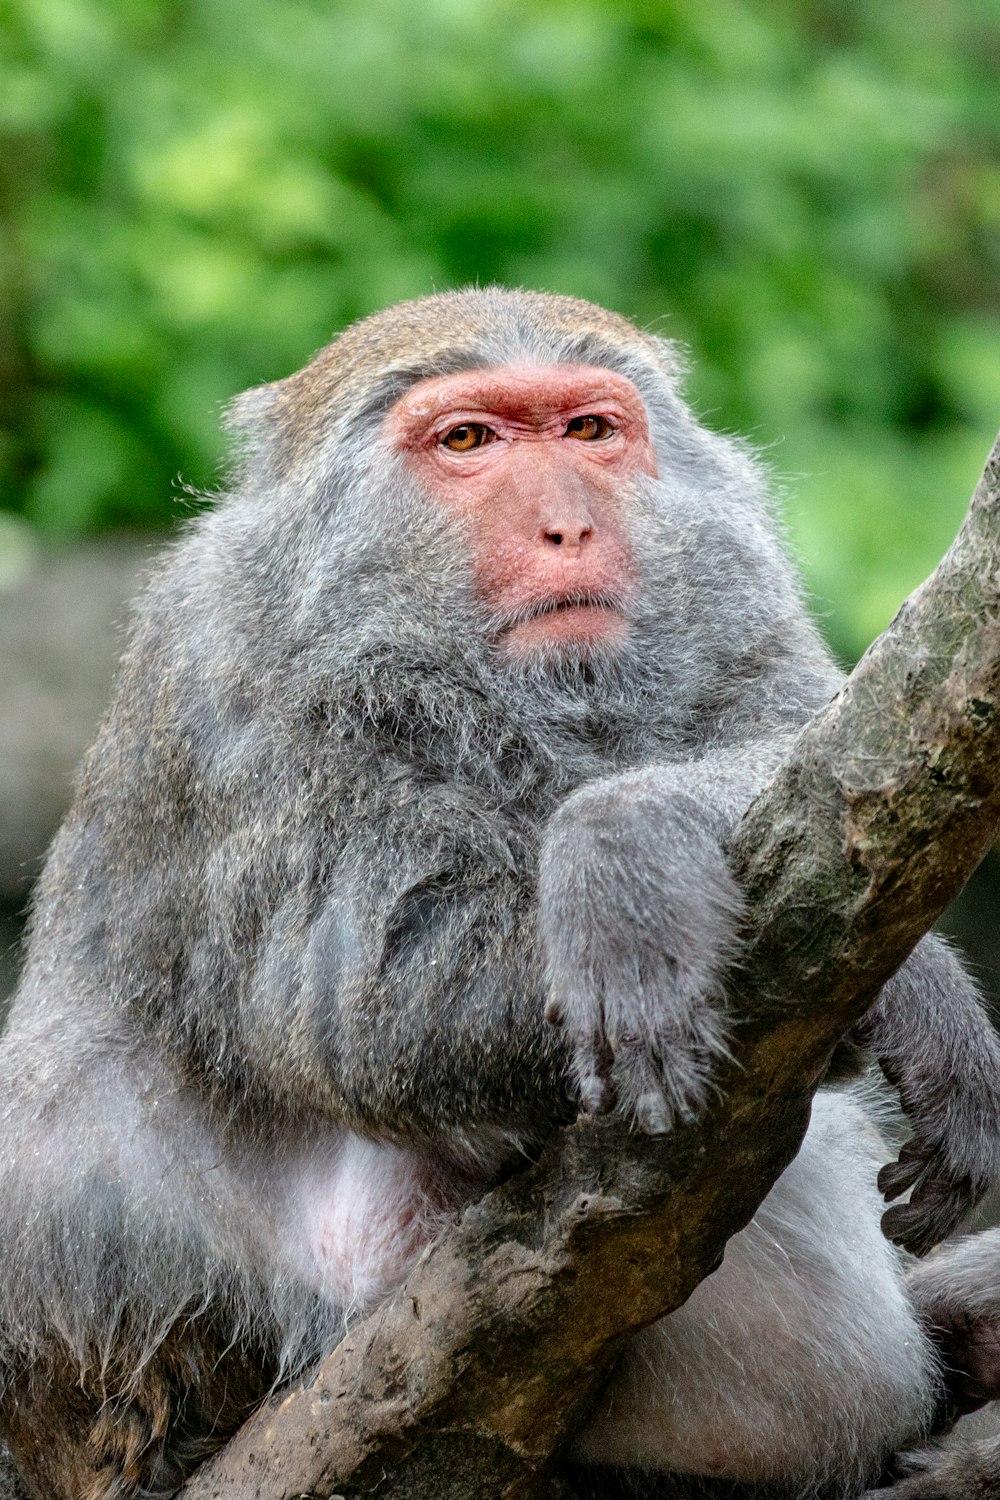 a close up of a monkey on a tree branch